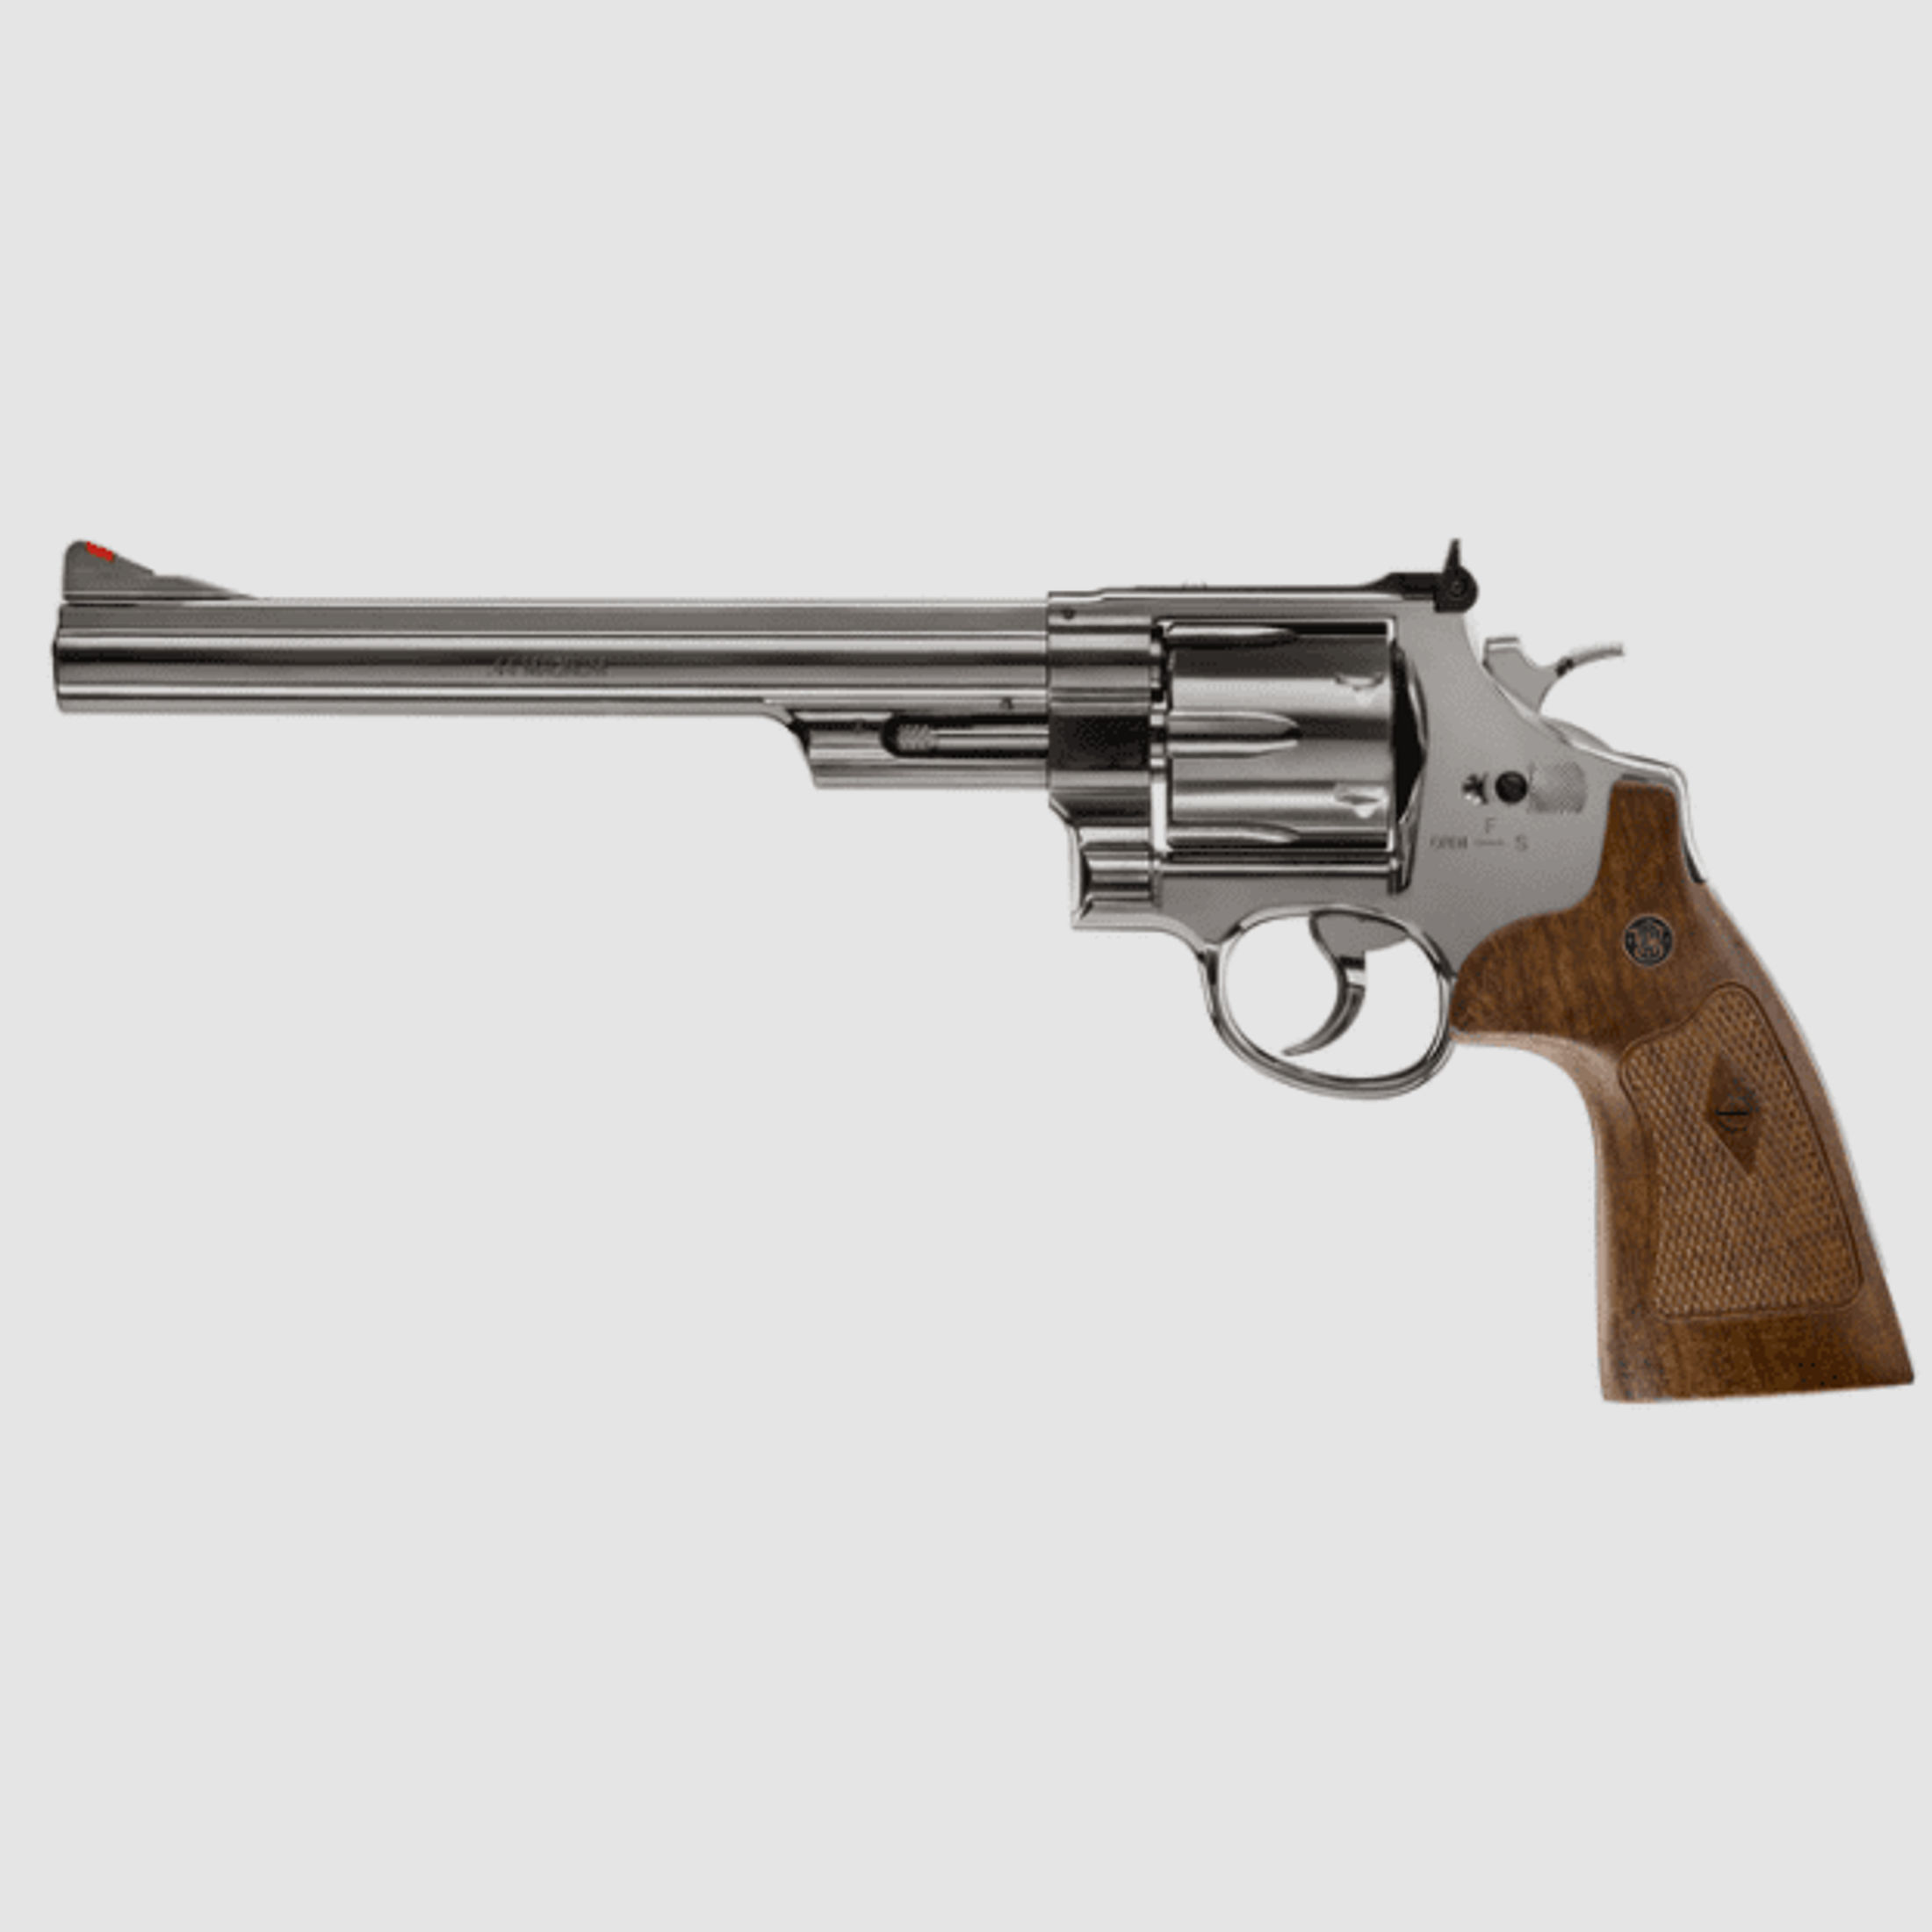 Smith & Wesson M29 8 3/8" 6 mm BB Airsoft Revolver